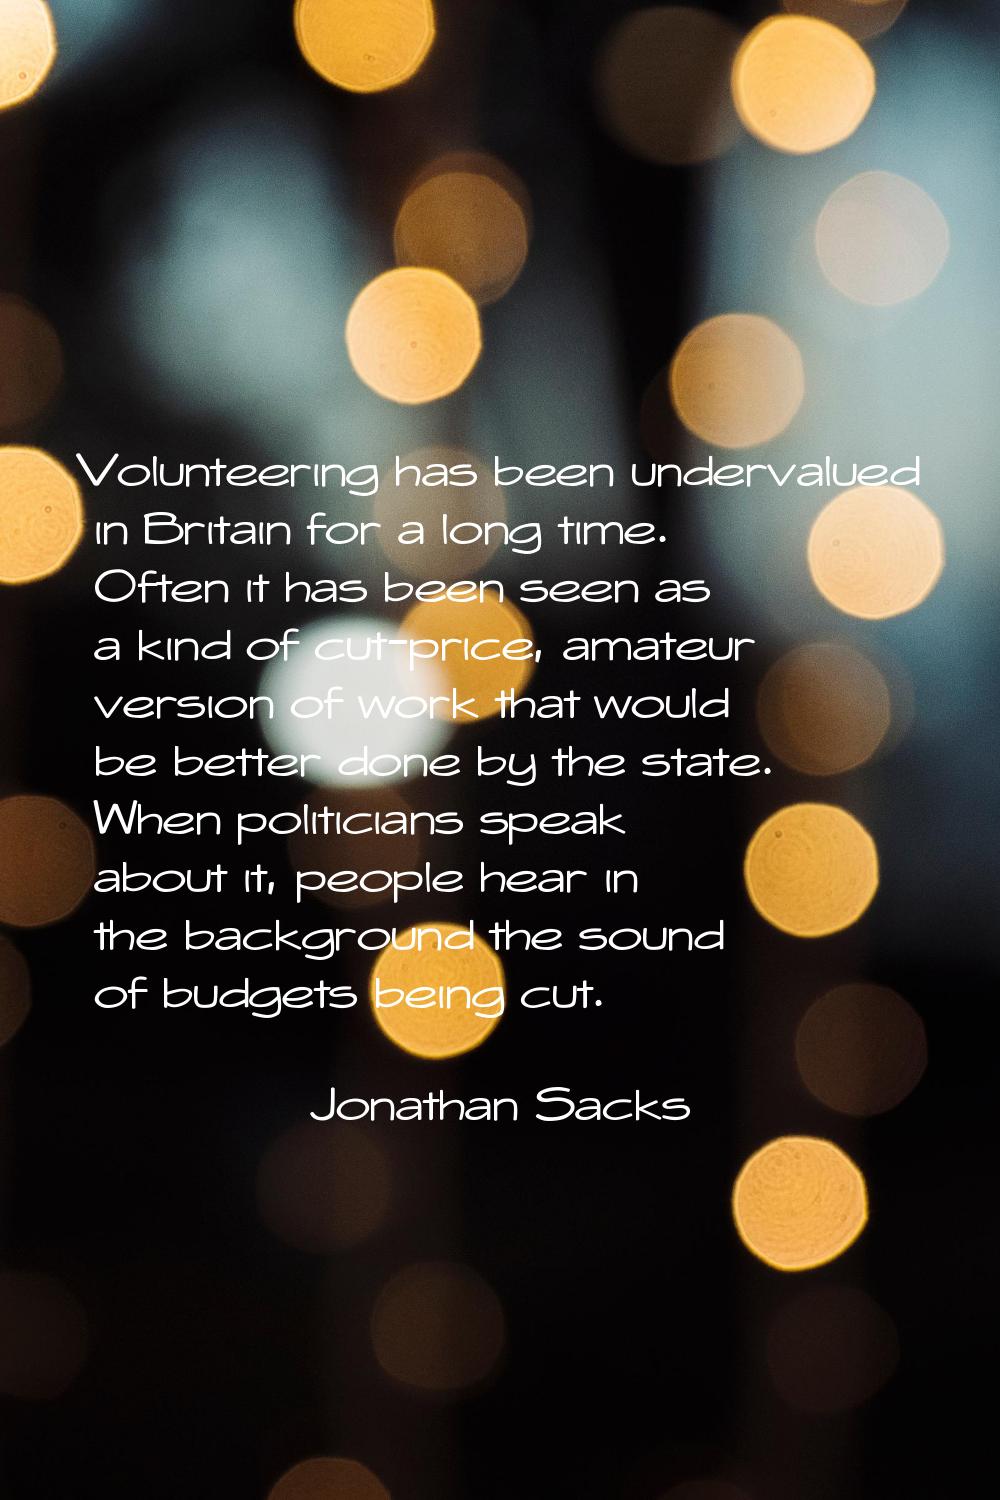 Volunteering has been undervalued in Britain for a long time. Often it has been seen as a kind of c